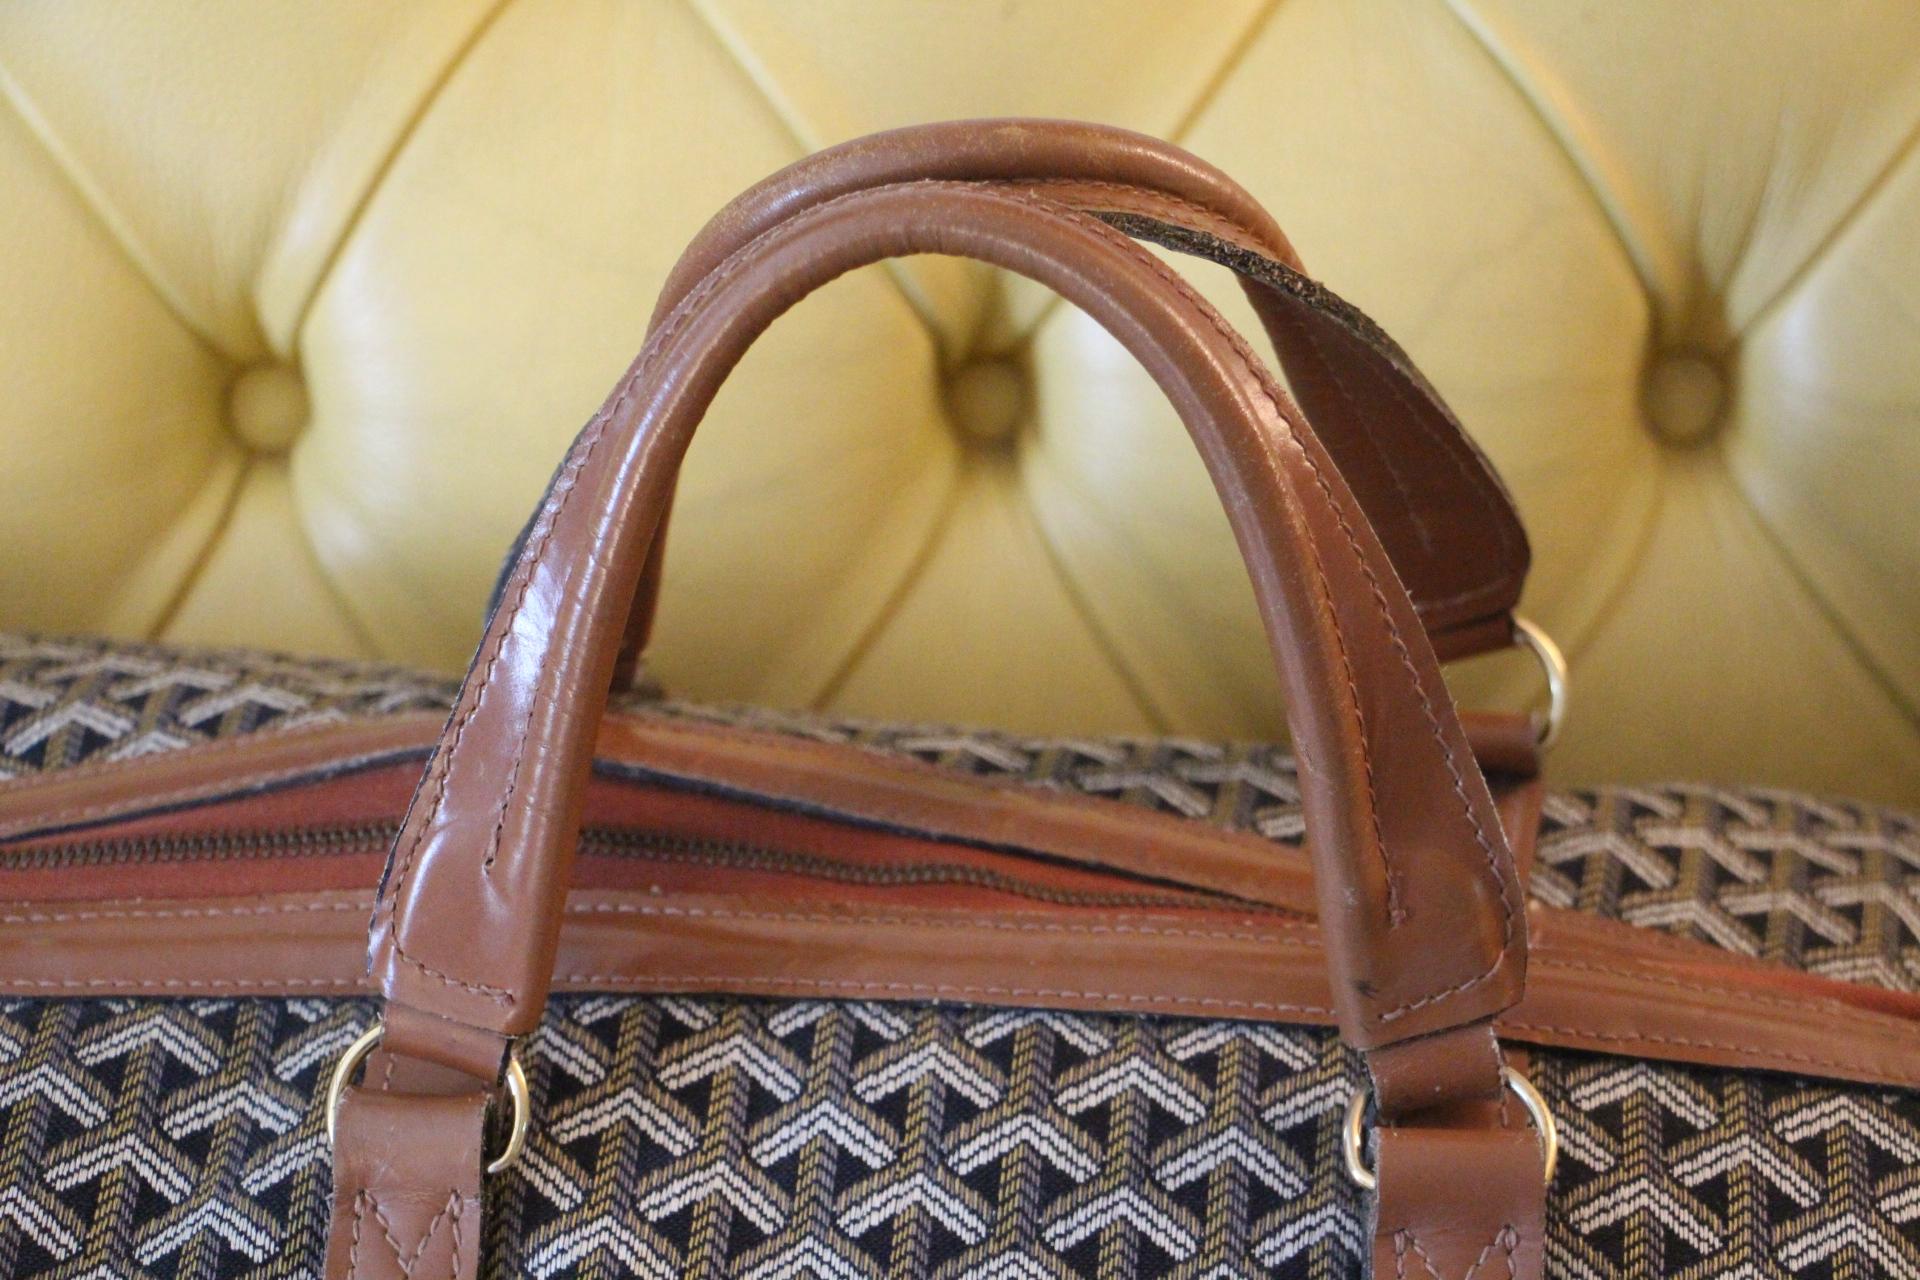 This very nice Goyard bag features the very famous Goyard chevrons canvas as well as many pieces of honey color leather.It has got 2 comfortable leather handles and opens on the top thanks to its zip. A JF monogram was embossed on one leather